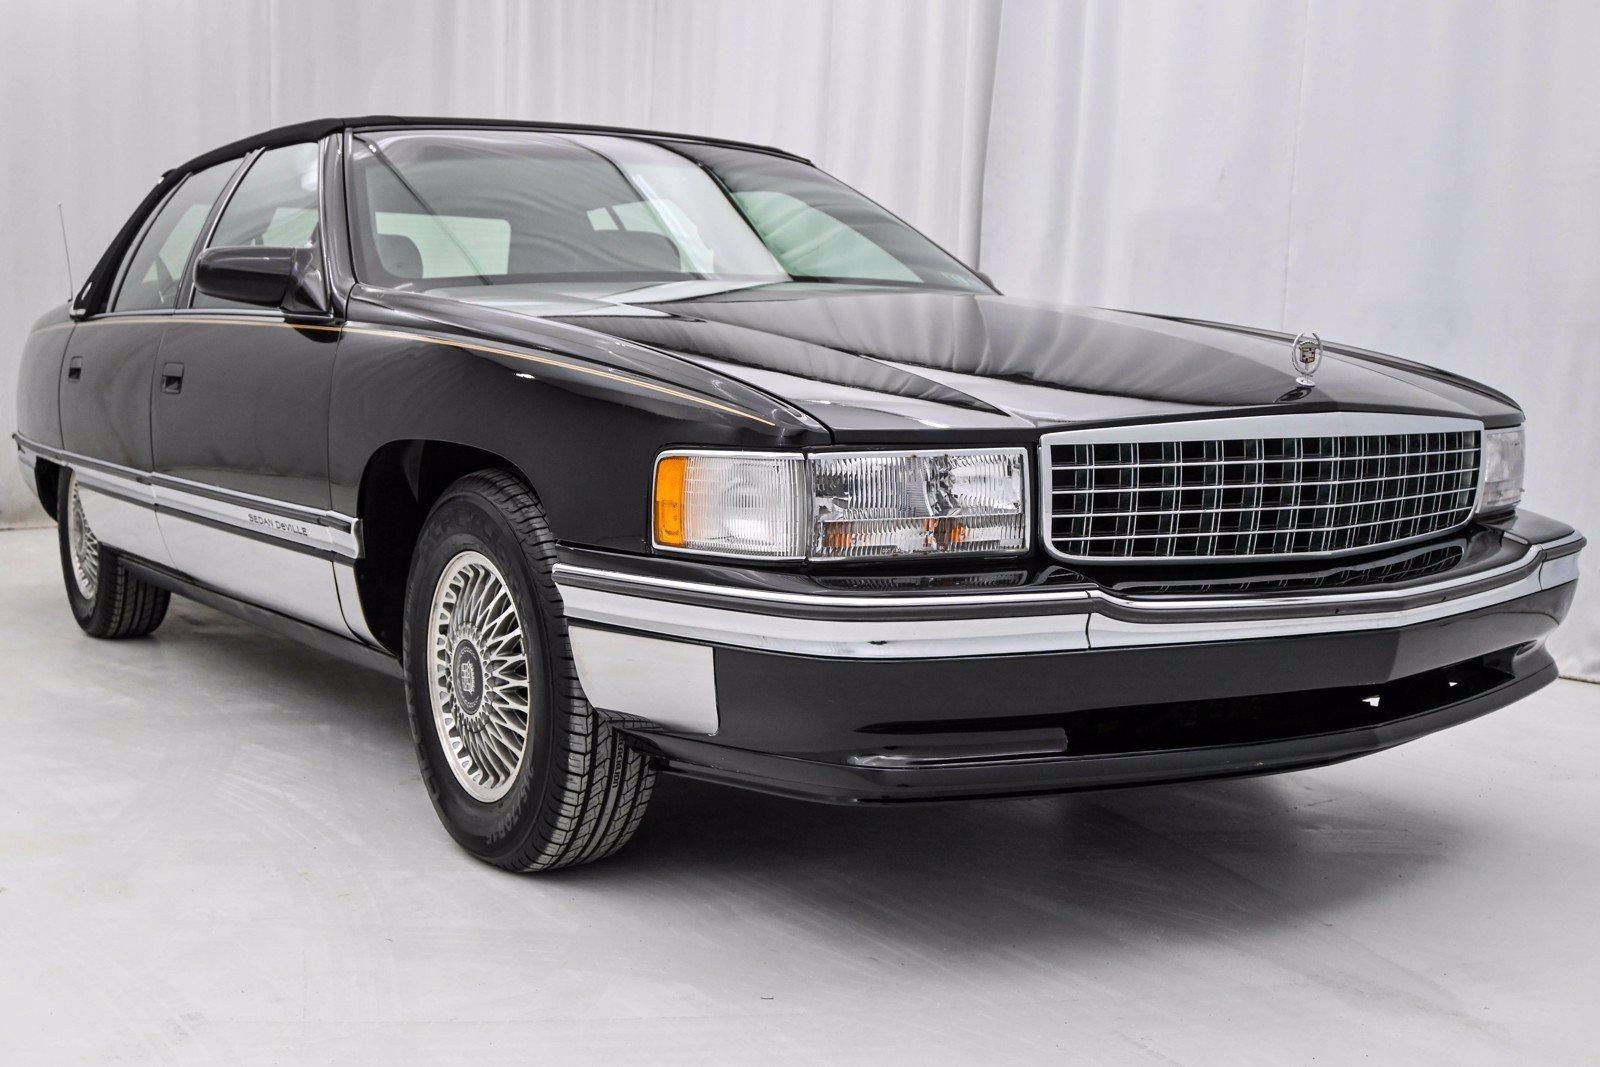 1995 Cadillac DeVille Price, Review & Ratings